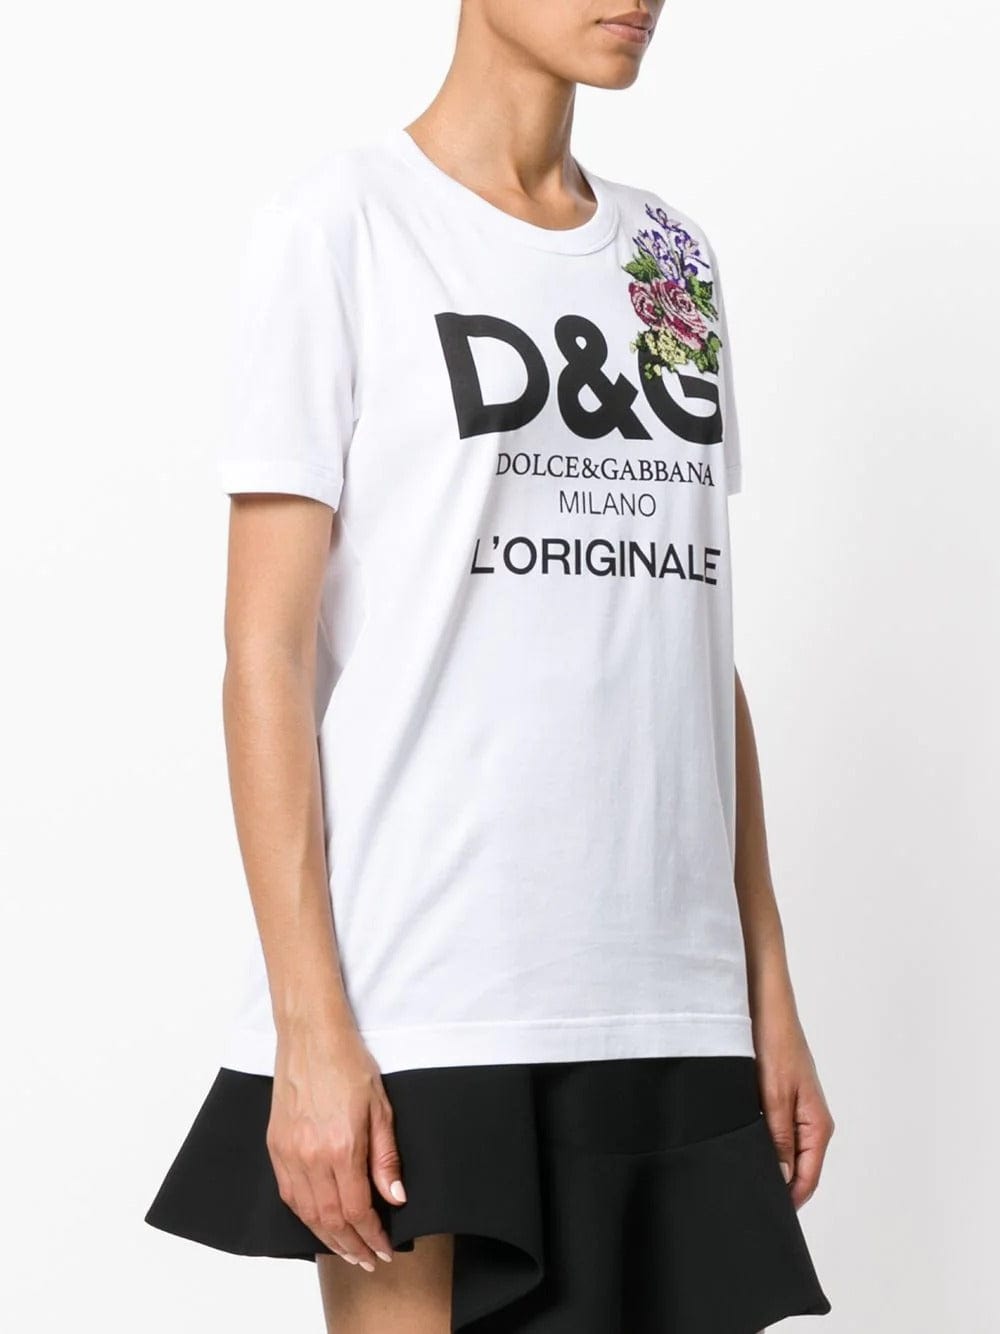 Dolce & Gabbana Embroidered Printed Cotton T-Shirt